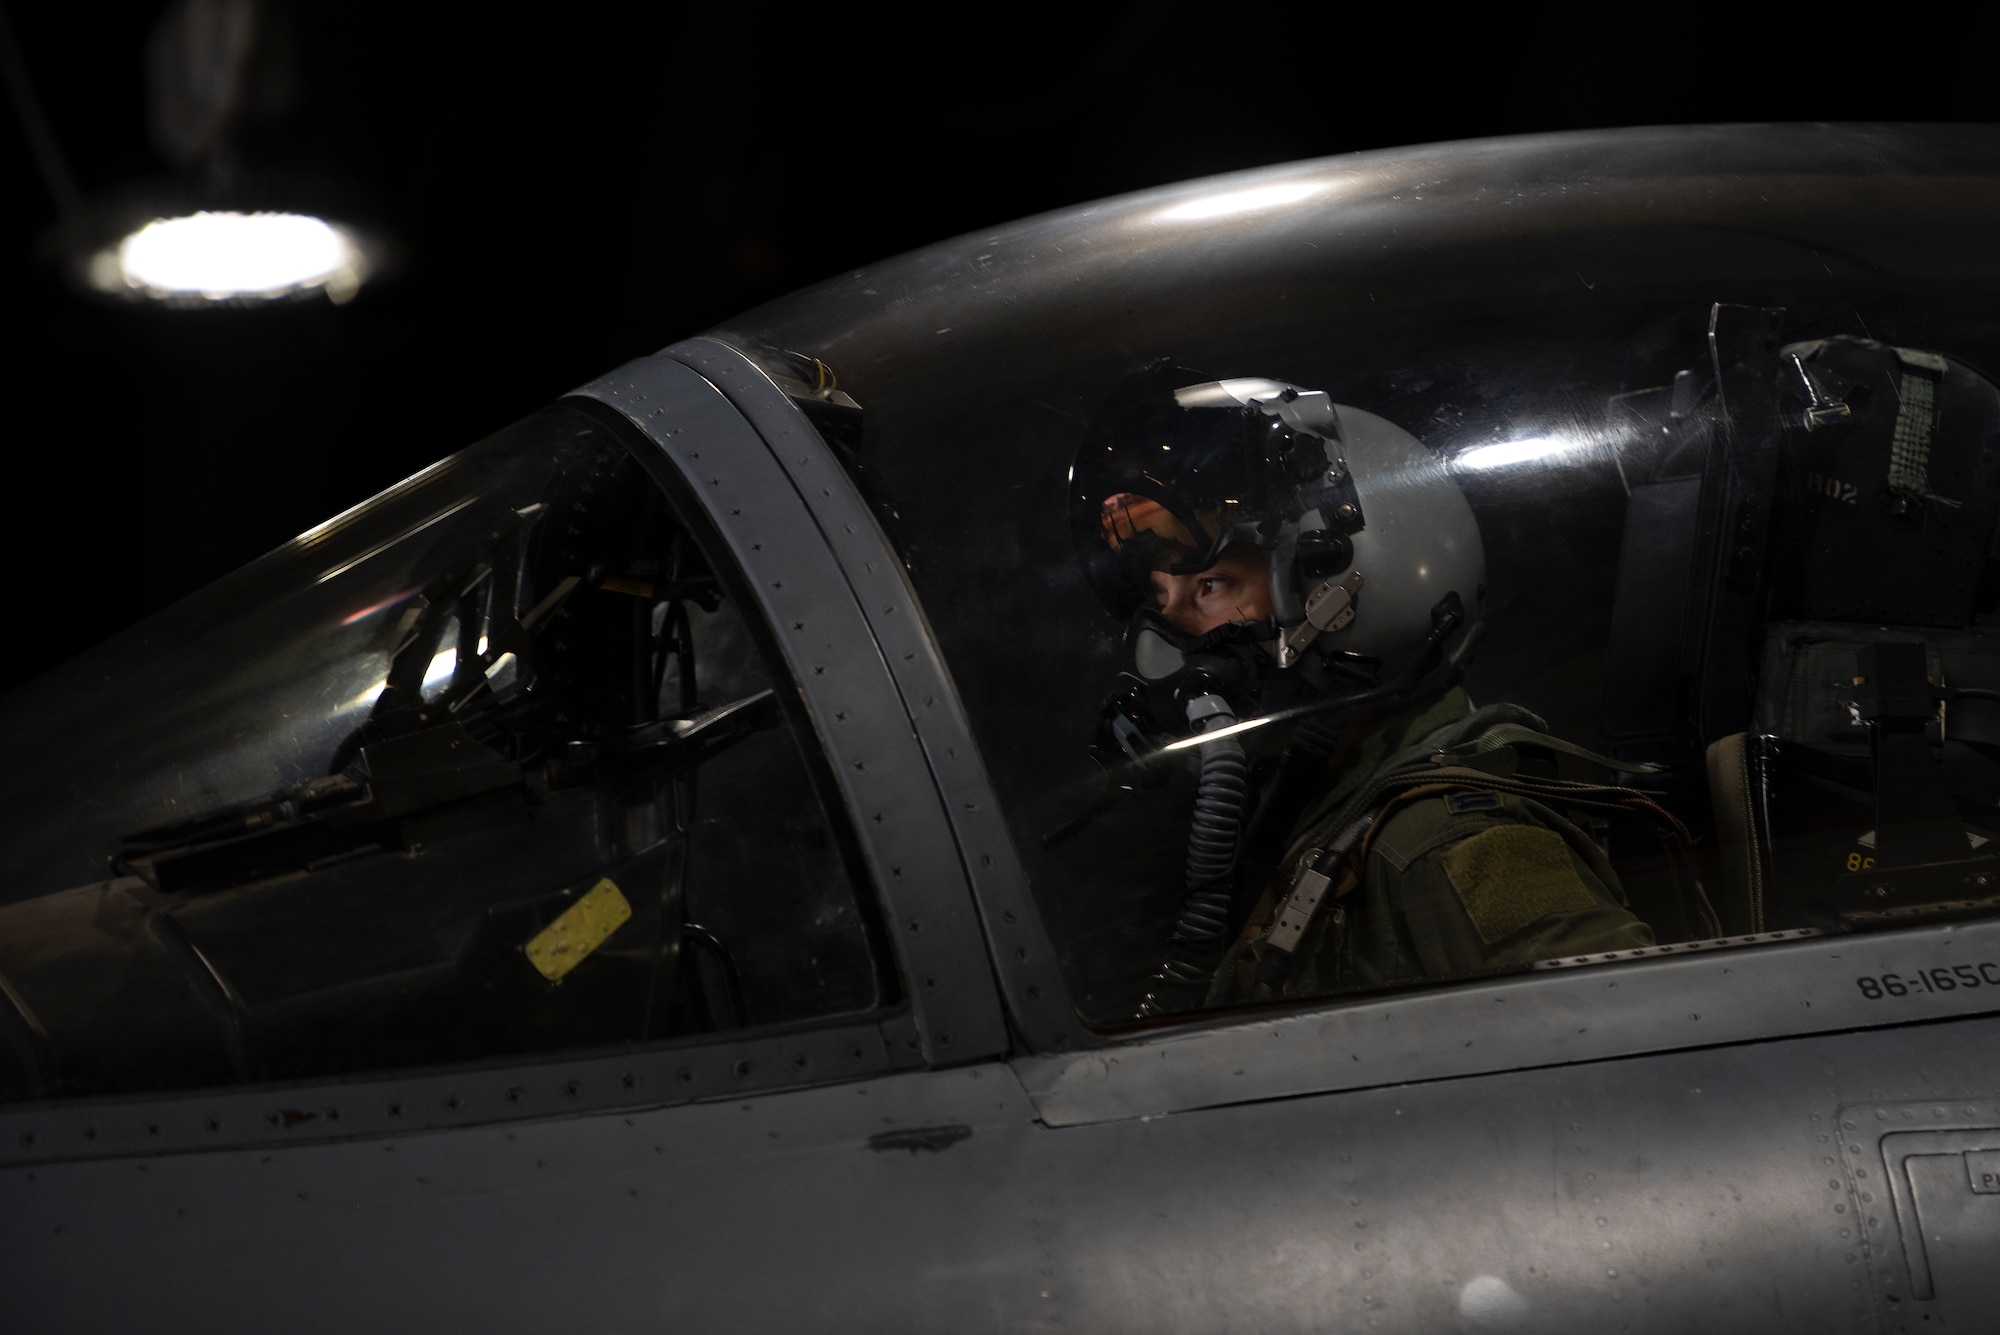 A U.S. Air Force pilot, assigned to the 493rd Fighter Squadron,  prepares to taxi to the flightline in support of exercise Astral Knight 2020 at Royal Air Force Lakenheath, England, Sept. 21, 2020. AK20 is focused on multinational Integrated Air and Missile Defense assets and will feature fighter and surface-based air defense integration against air and cruise missile threats. (U.S. Air Force photo by Airman 1st Class Jessi Monte)